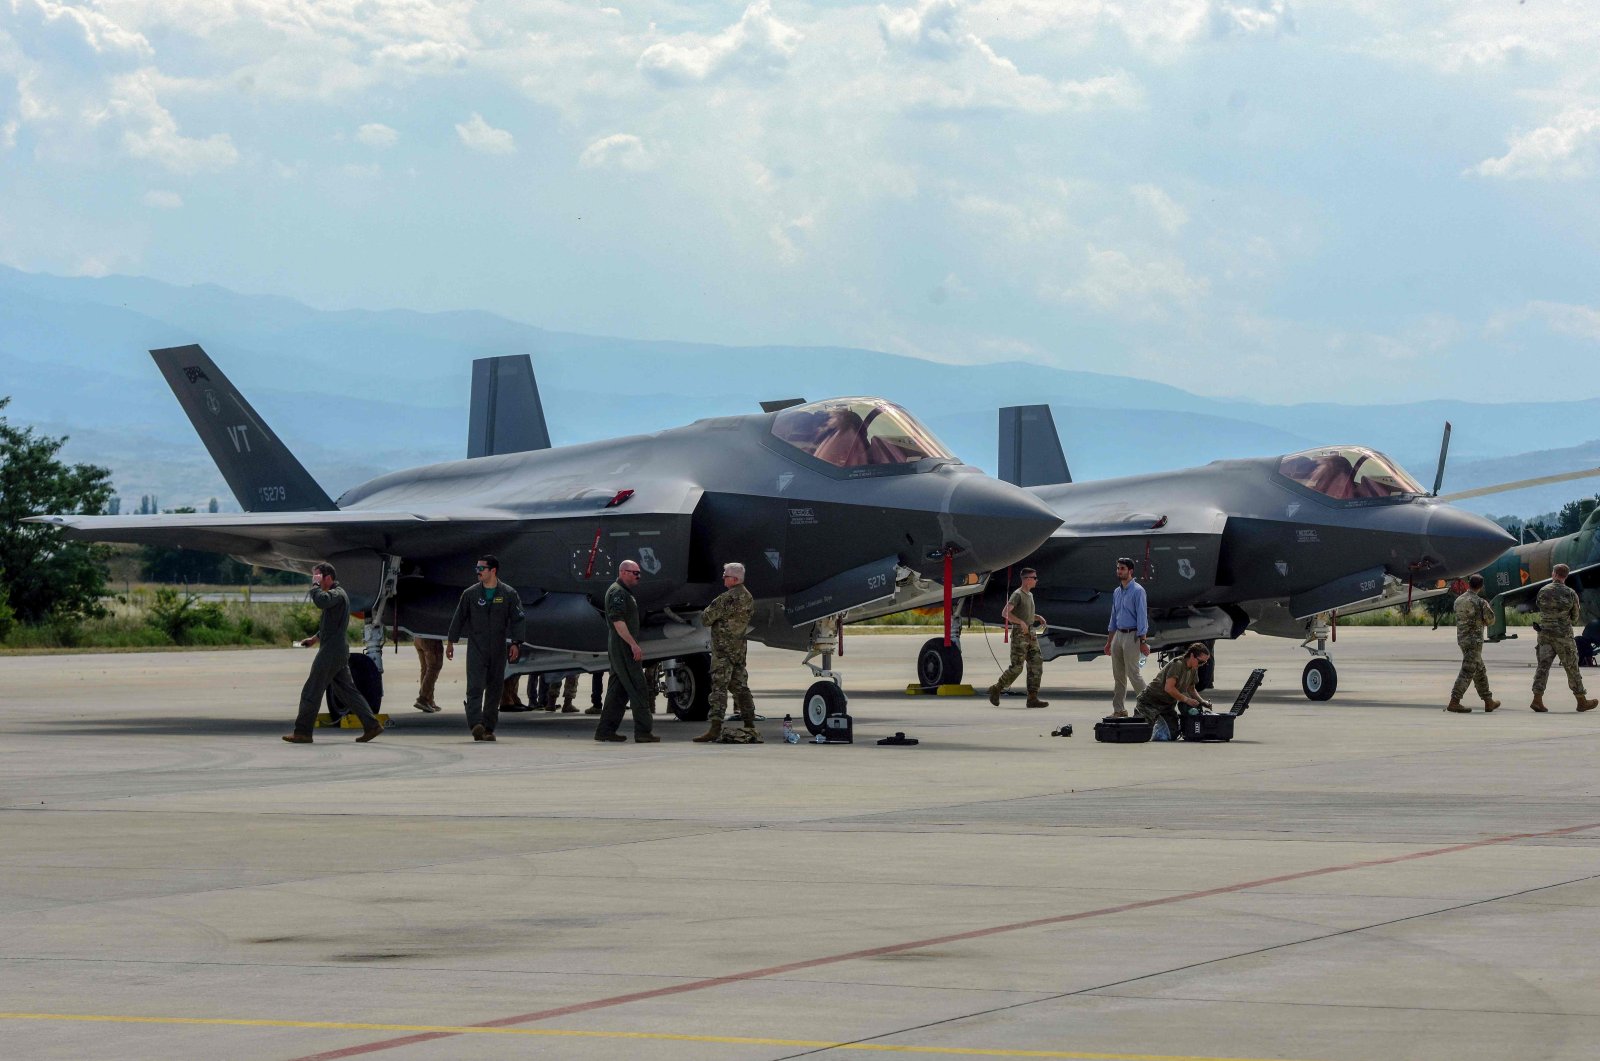 Two U.S. Air Force F-35 Lightning II aircraft from the Vermont Air National Guard 134th Fighter Squadron are seen on the tarmac after landing at the international airport Petrovec near Skopje, Macedonia, June 17, 2022 (AFP Photo)